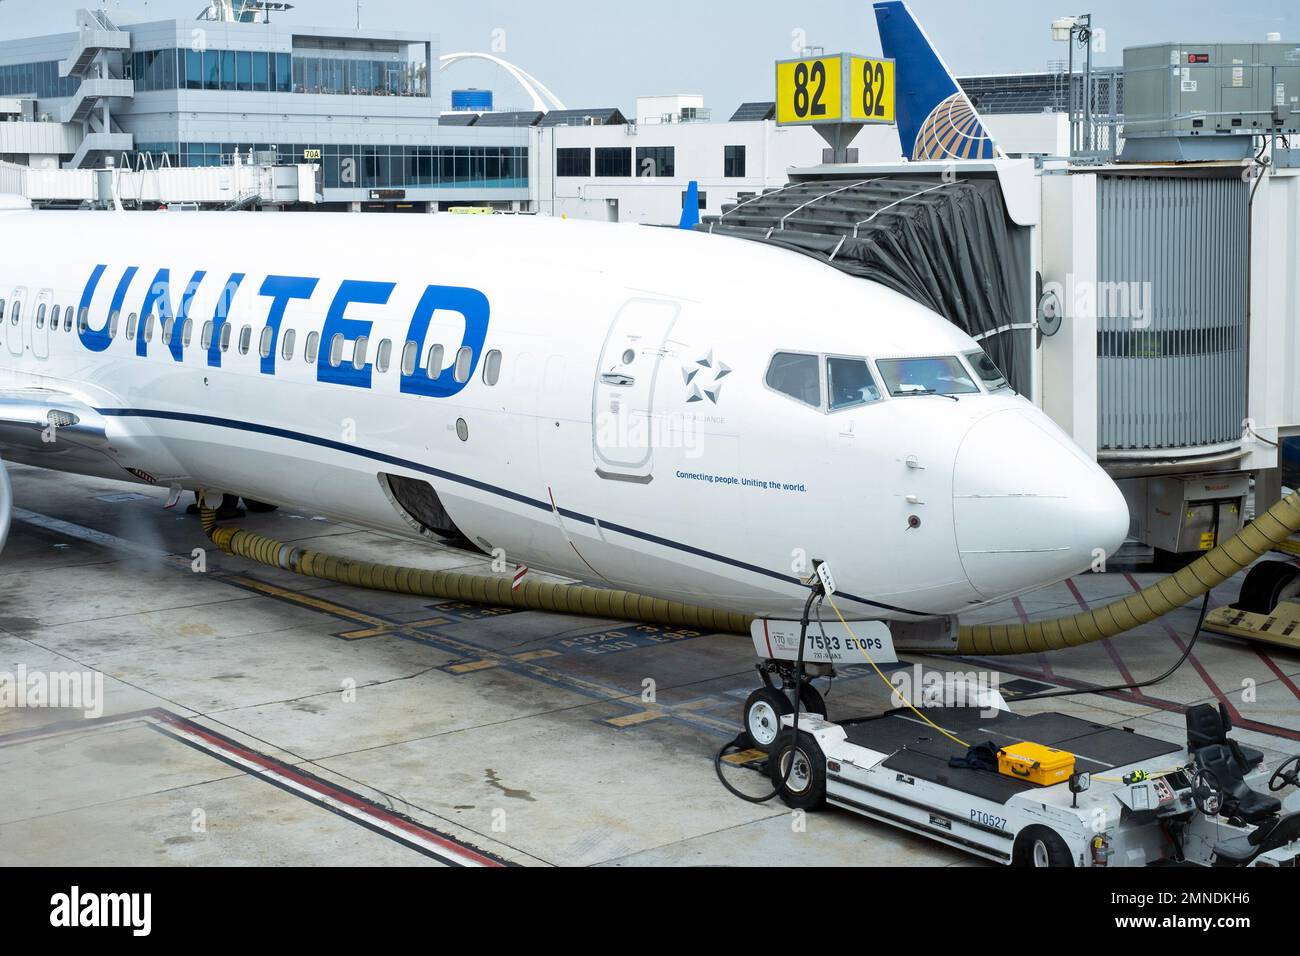 A United Airlines plane gets serviced at an airport in the United States. Stock Photo